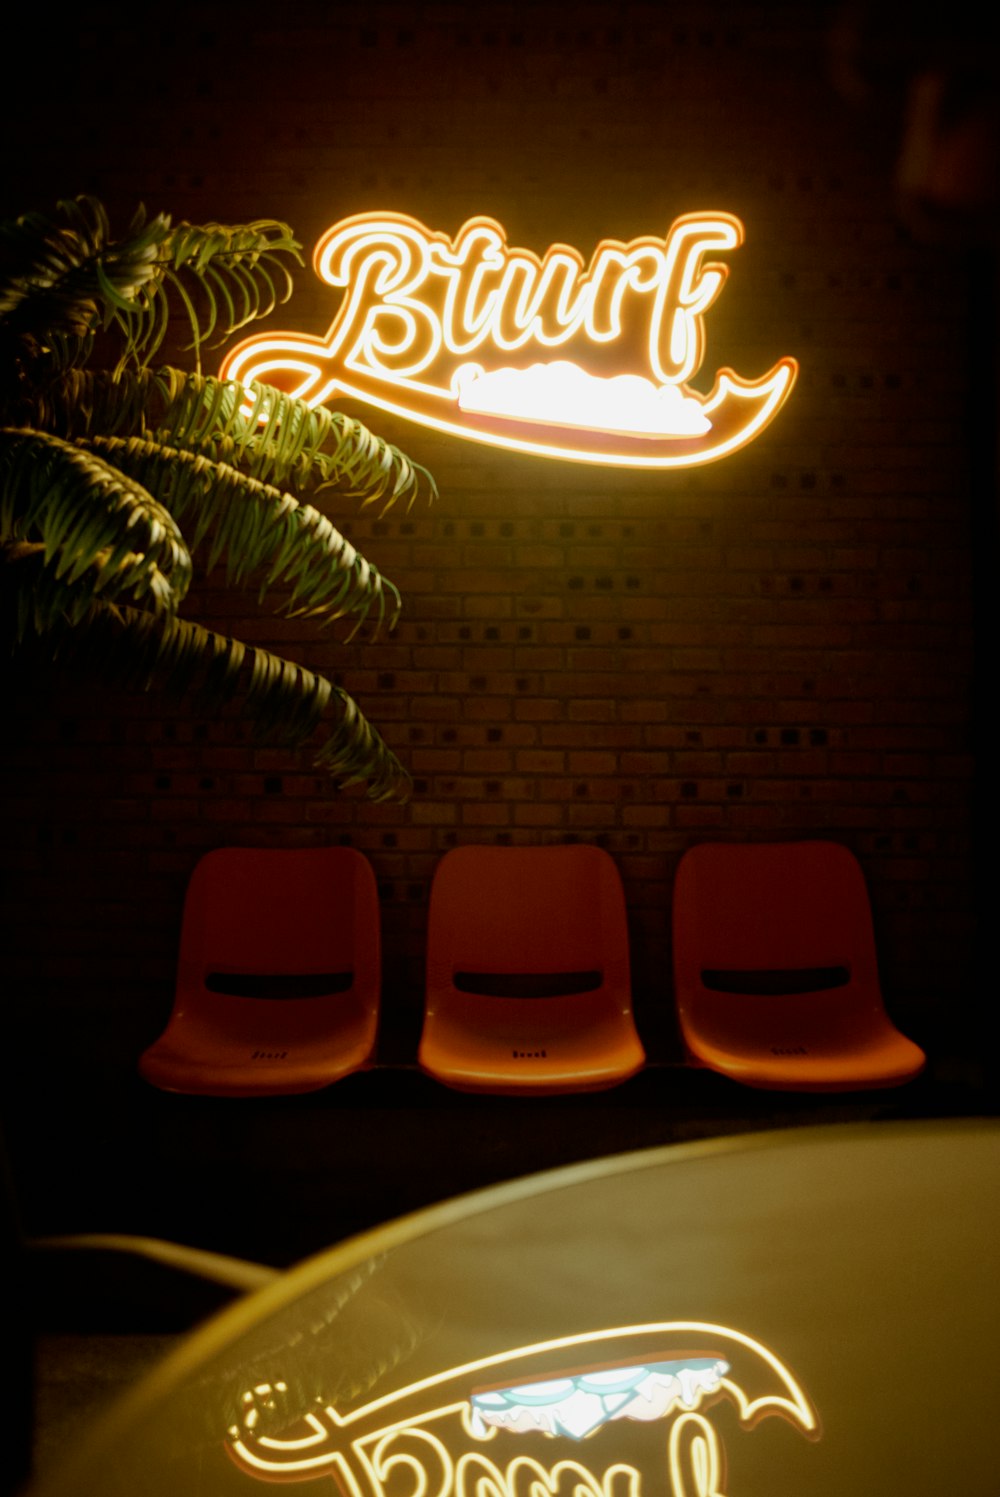 a neon sign above a row of red chairs